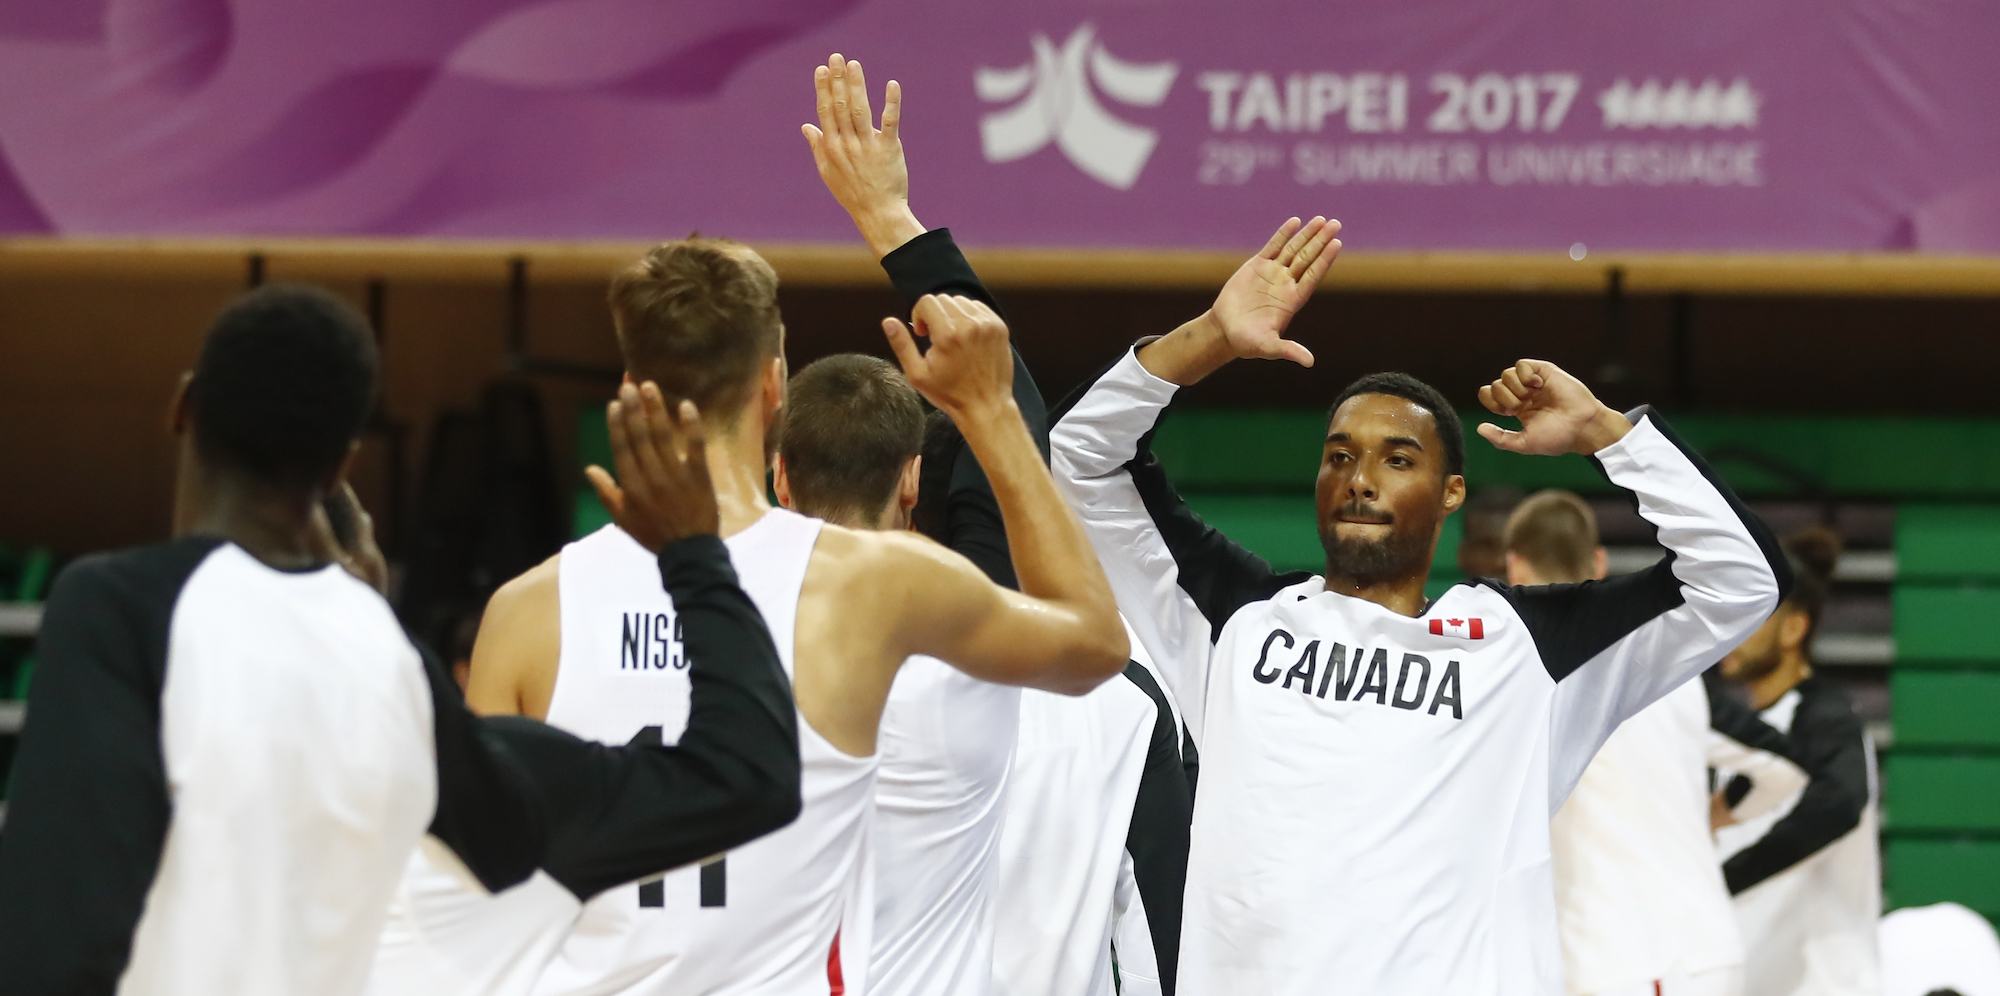 Canada rebounds with big win over Hong Kong